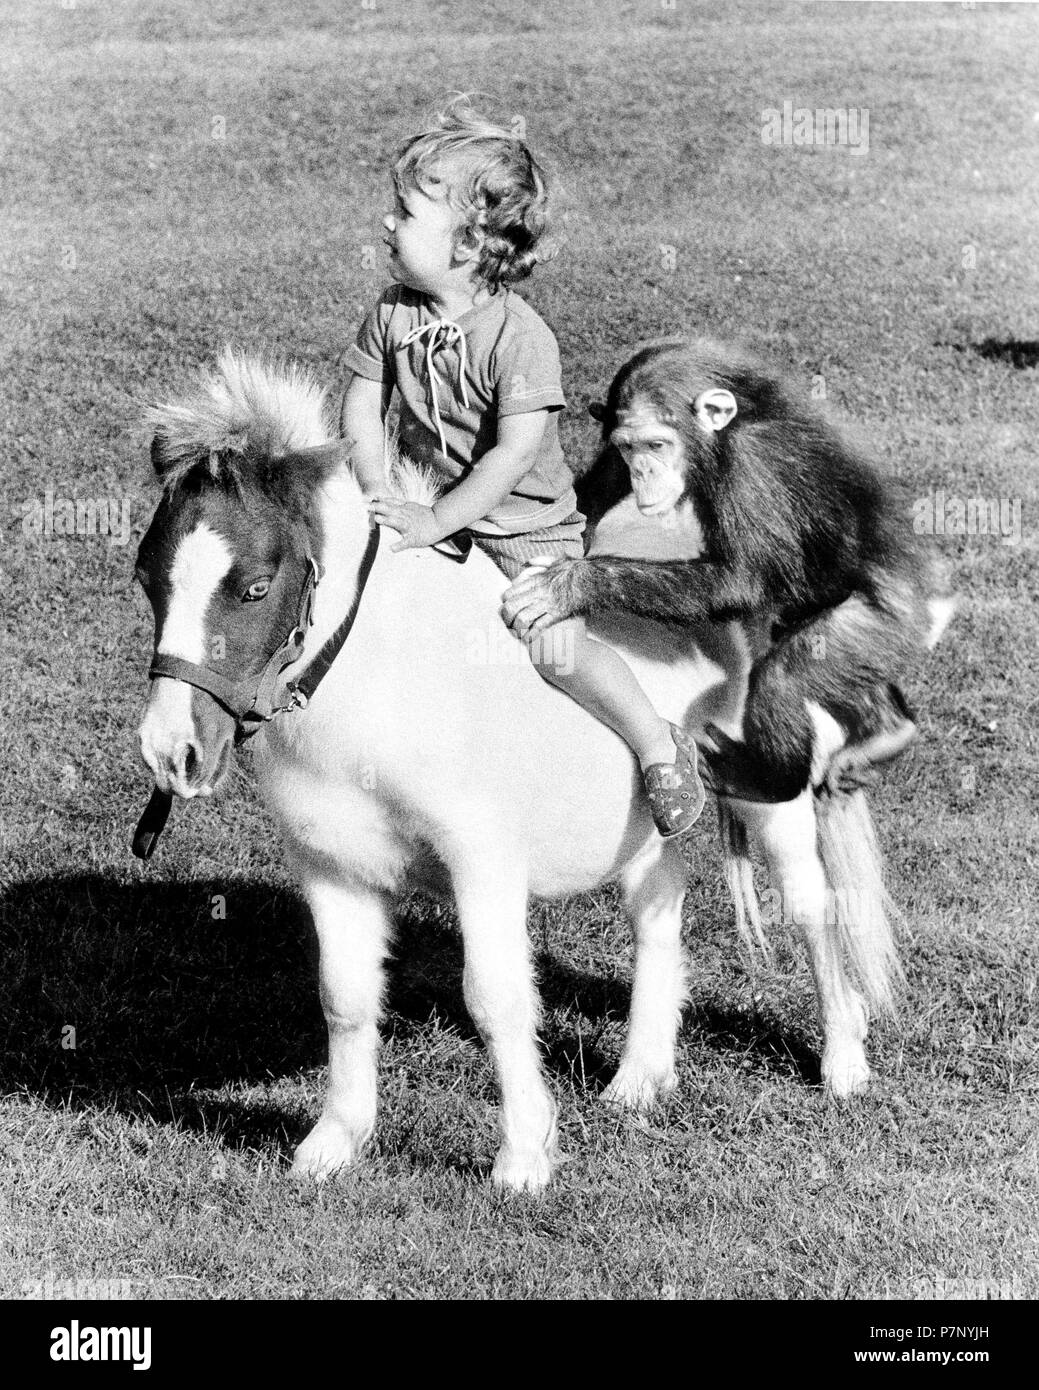 Child and chimpanzee ride on a pony, England, Great Britain Stock Photo